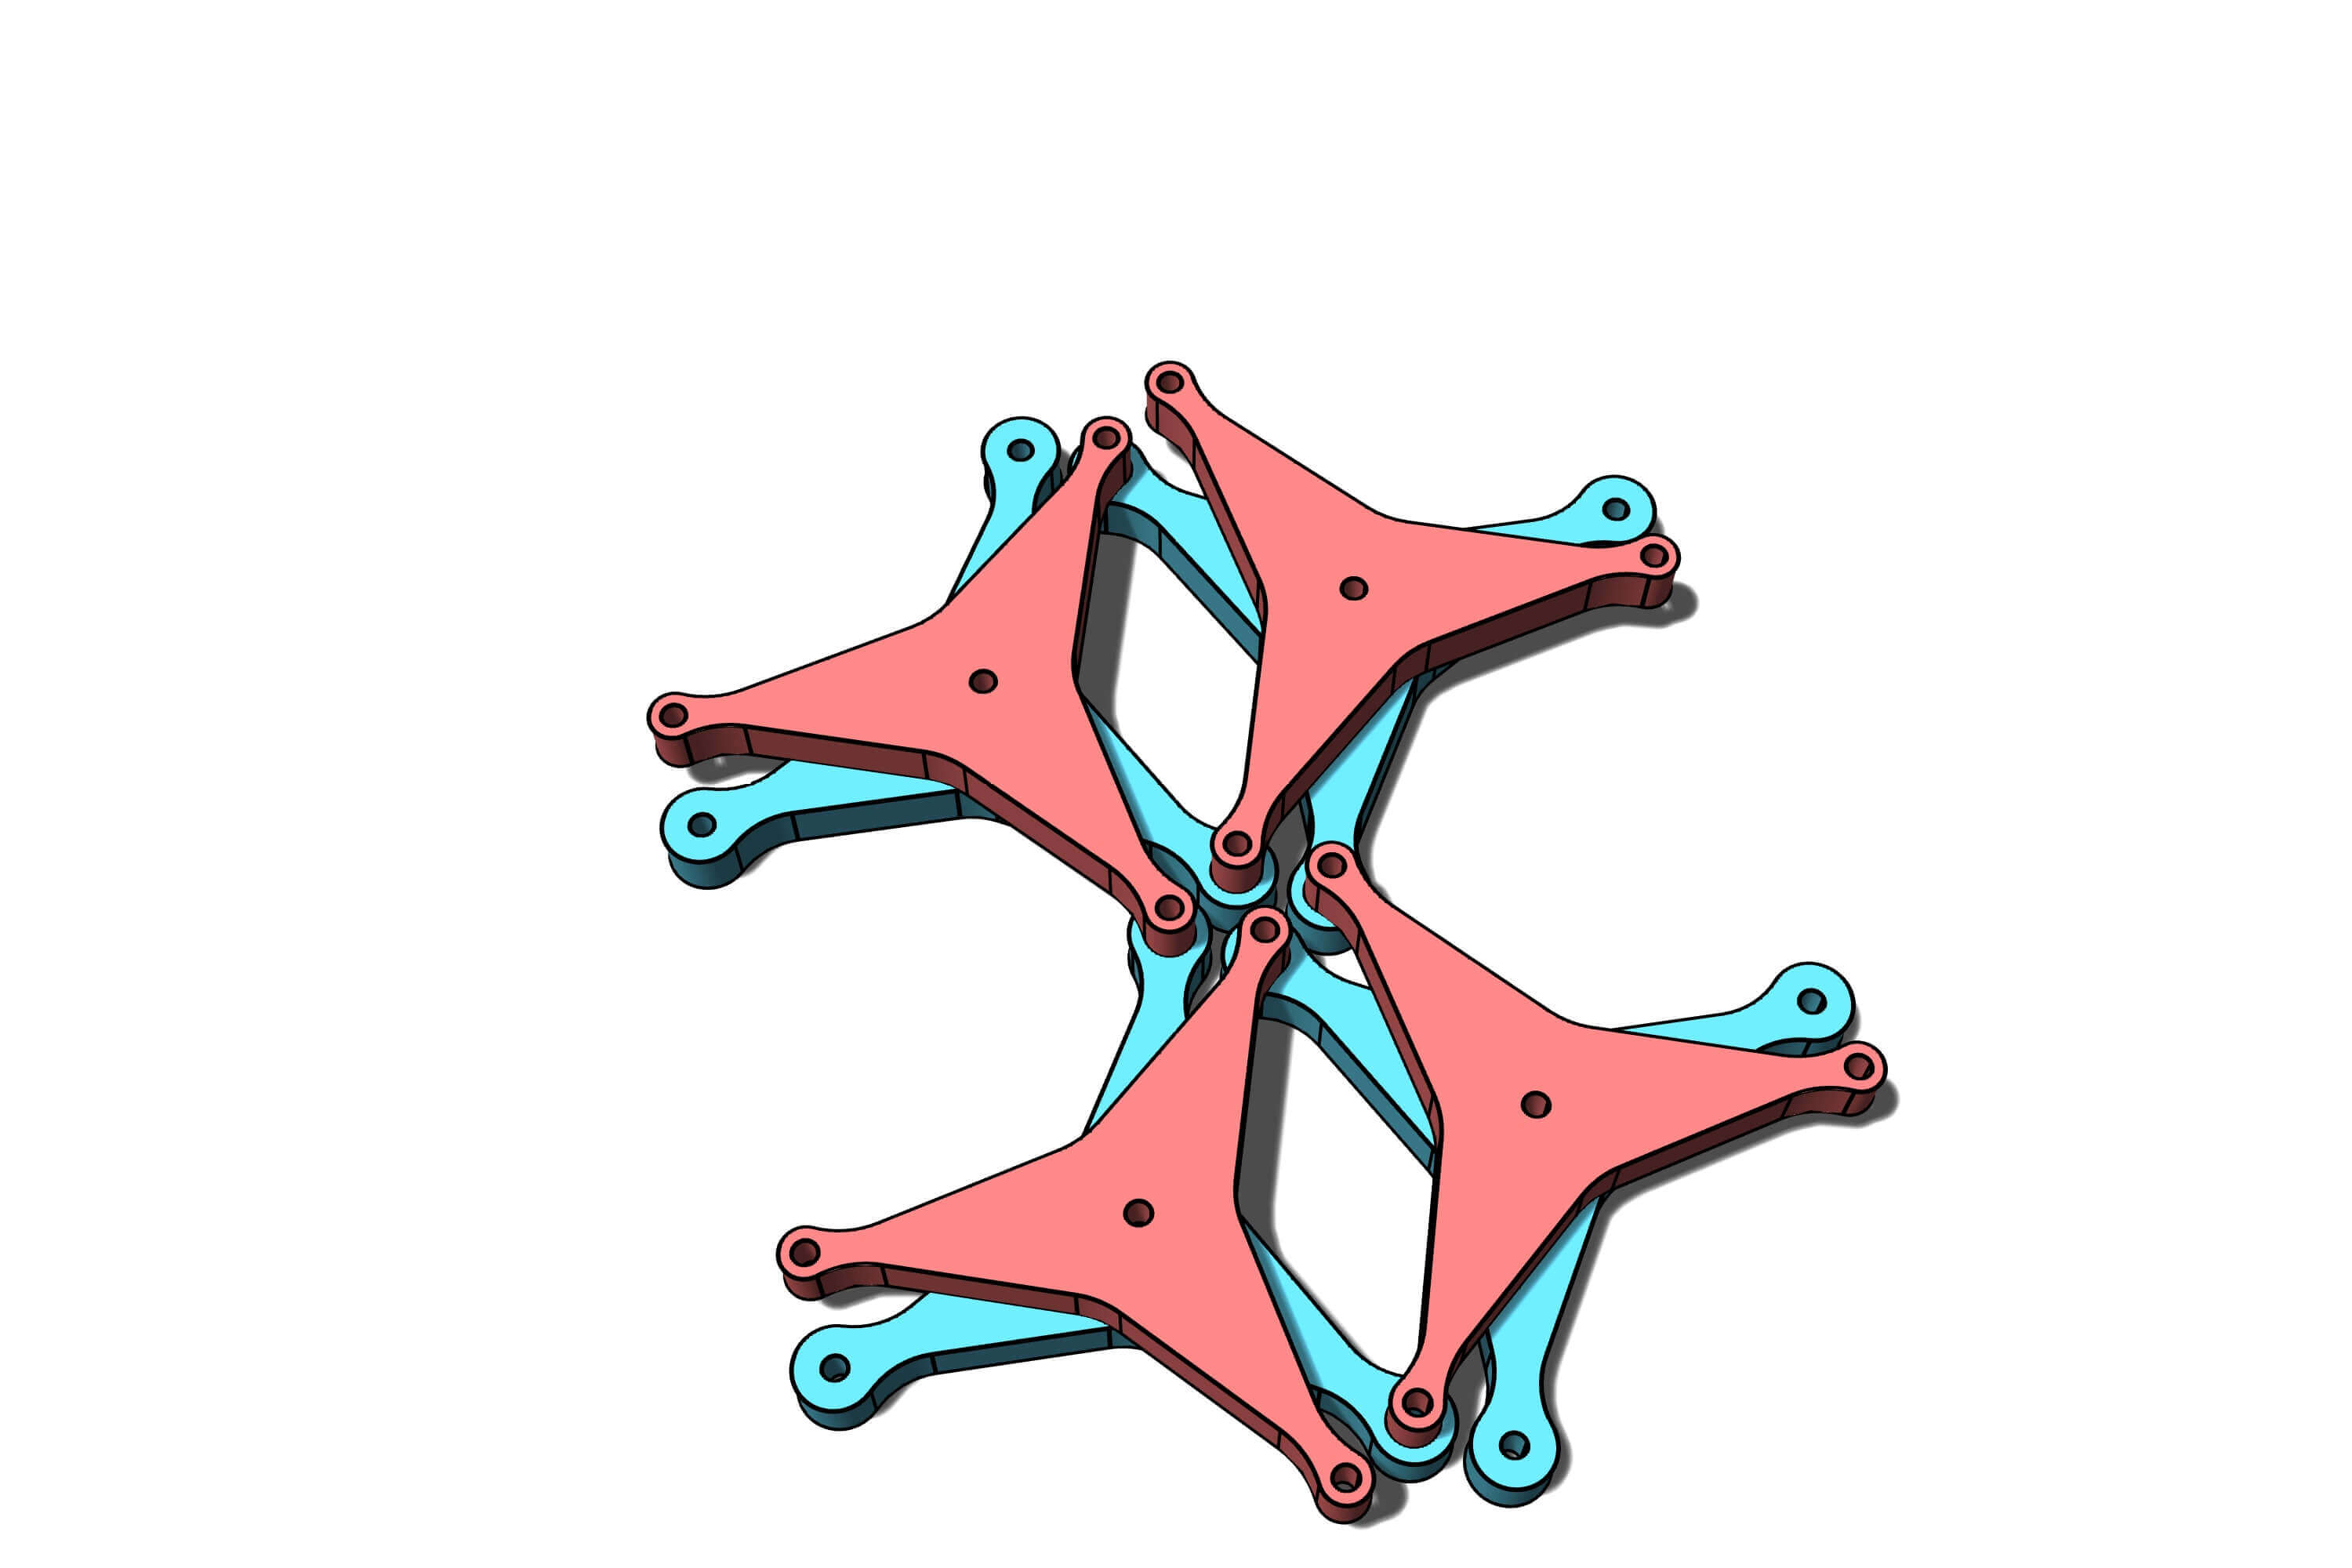 Two layer Mechanism